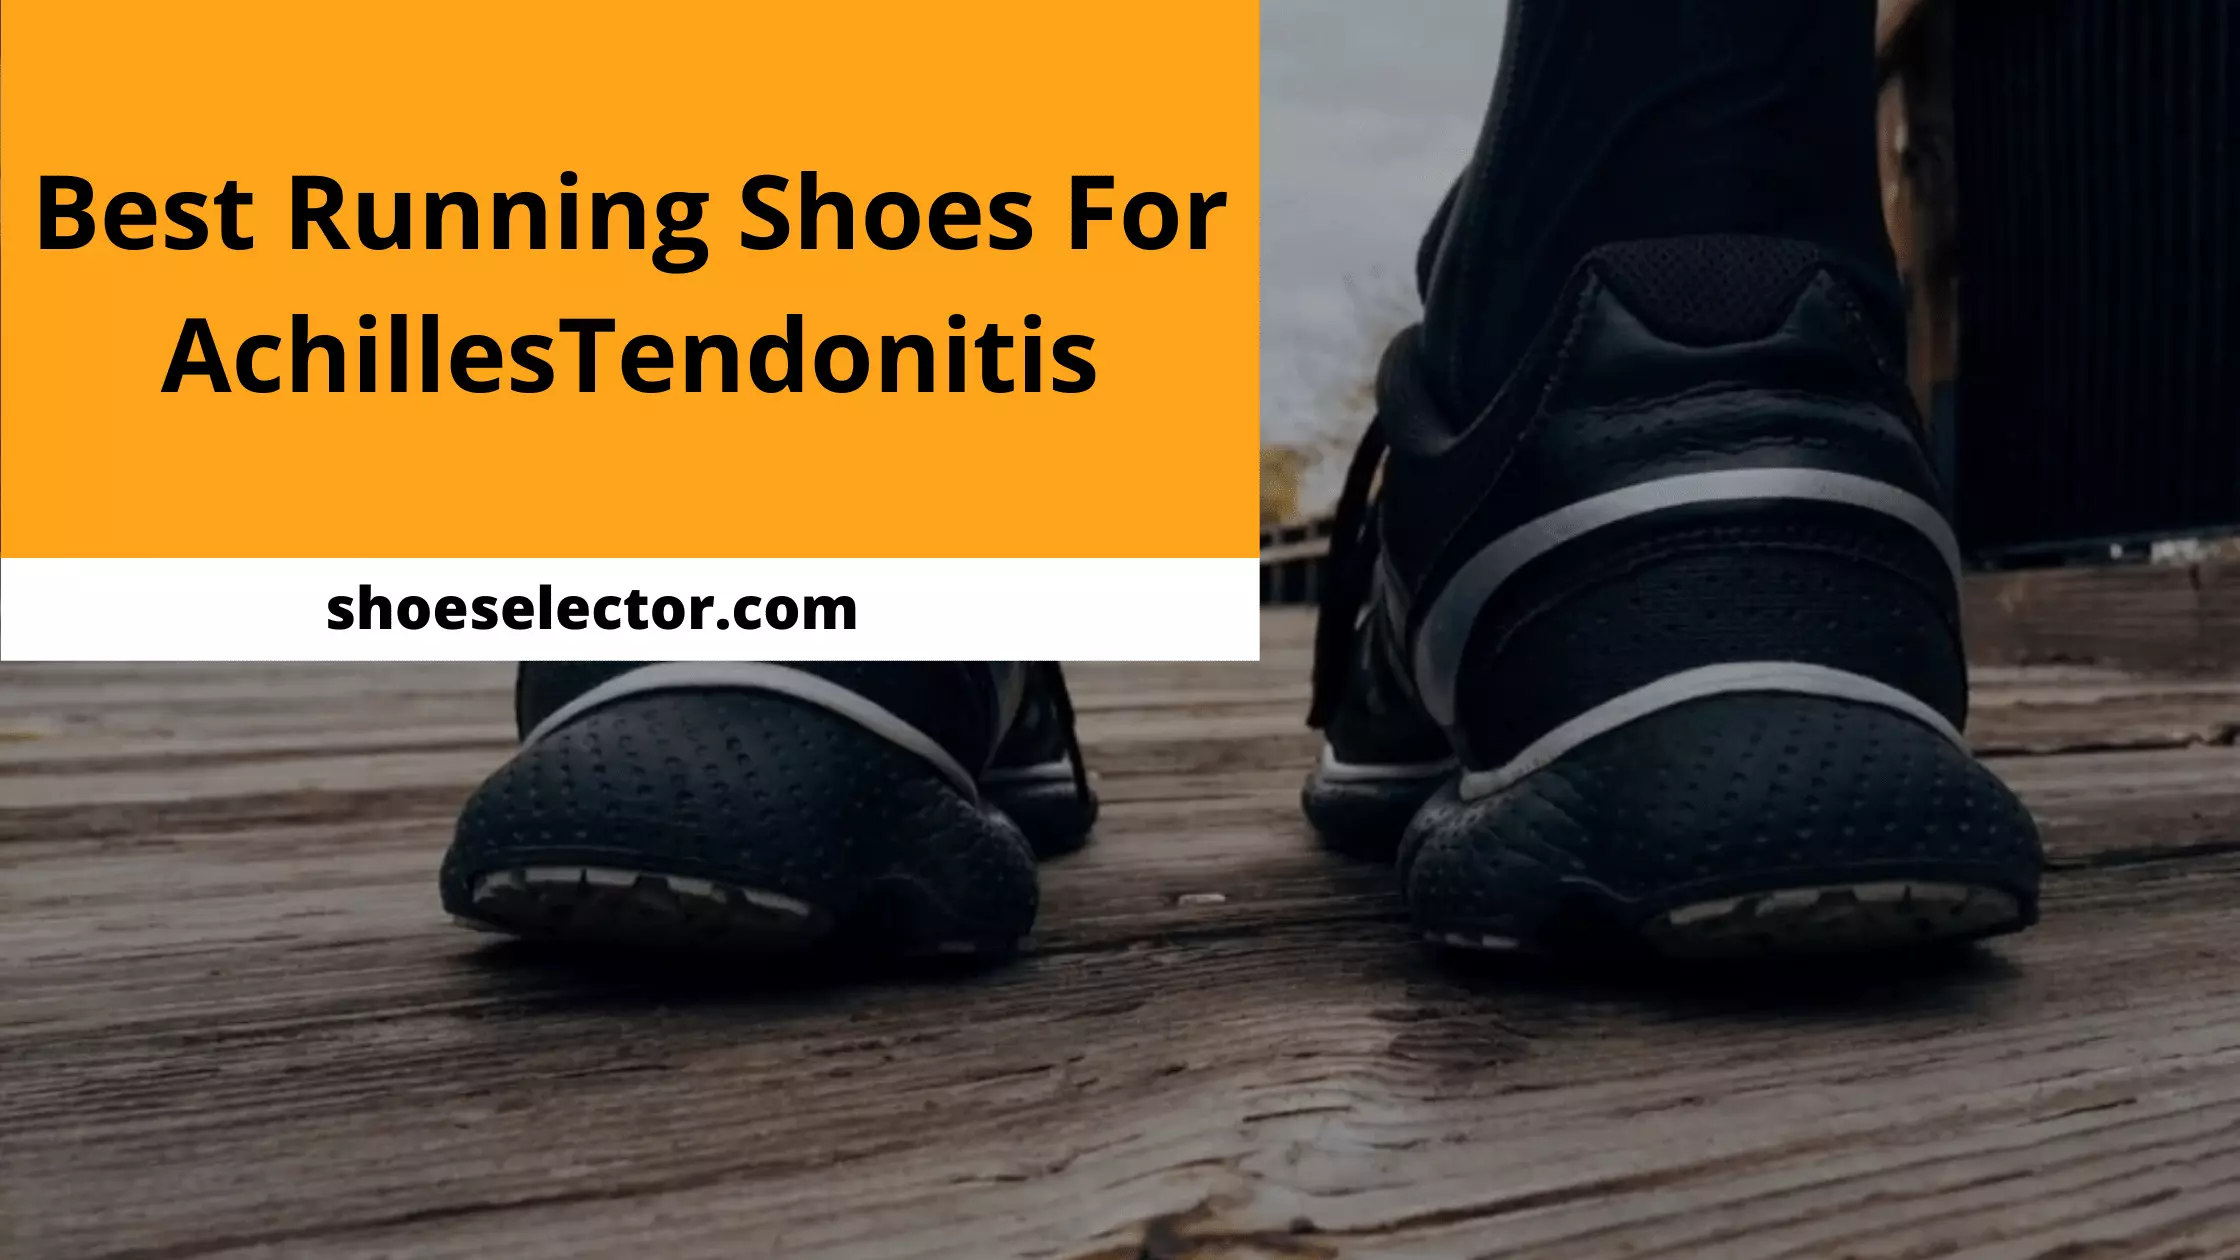 Best Running Shoes For Achilles Tendonitis With Shopping Tips